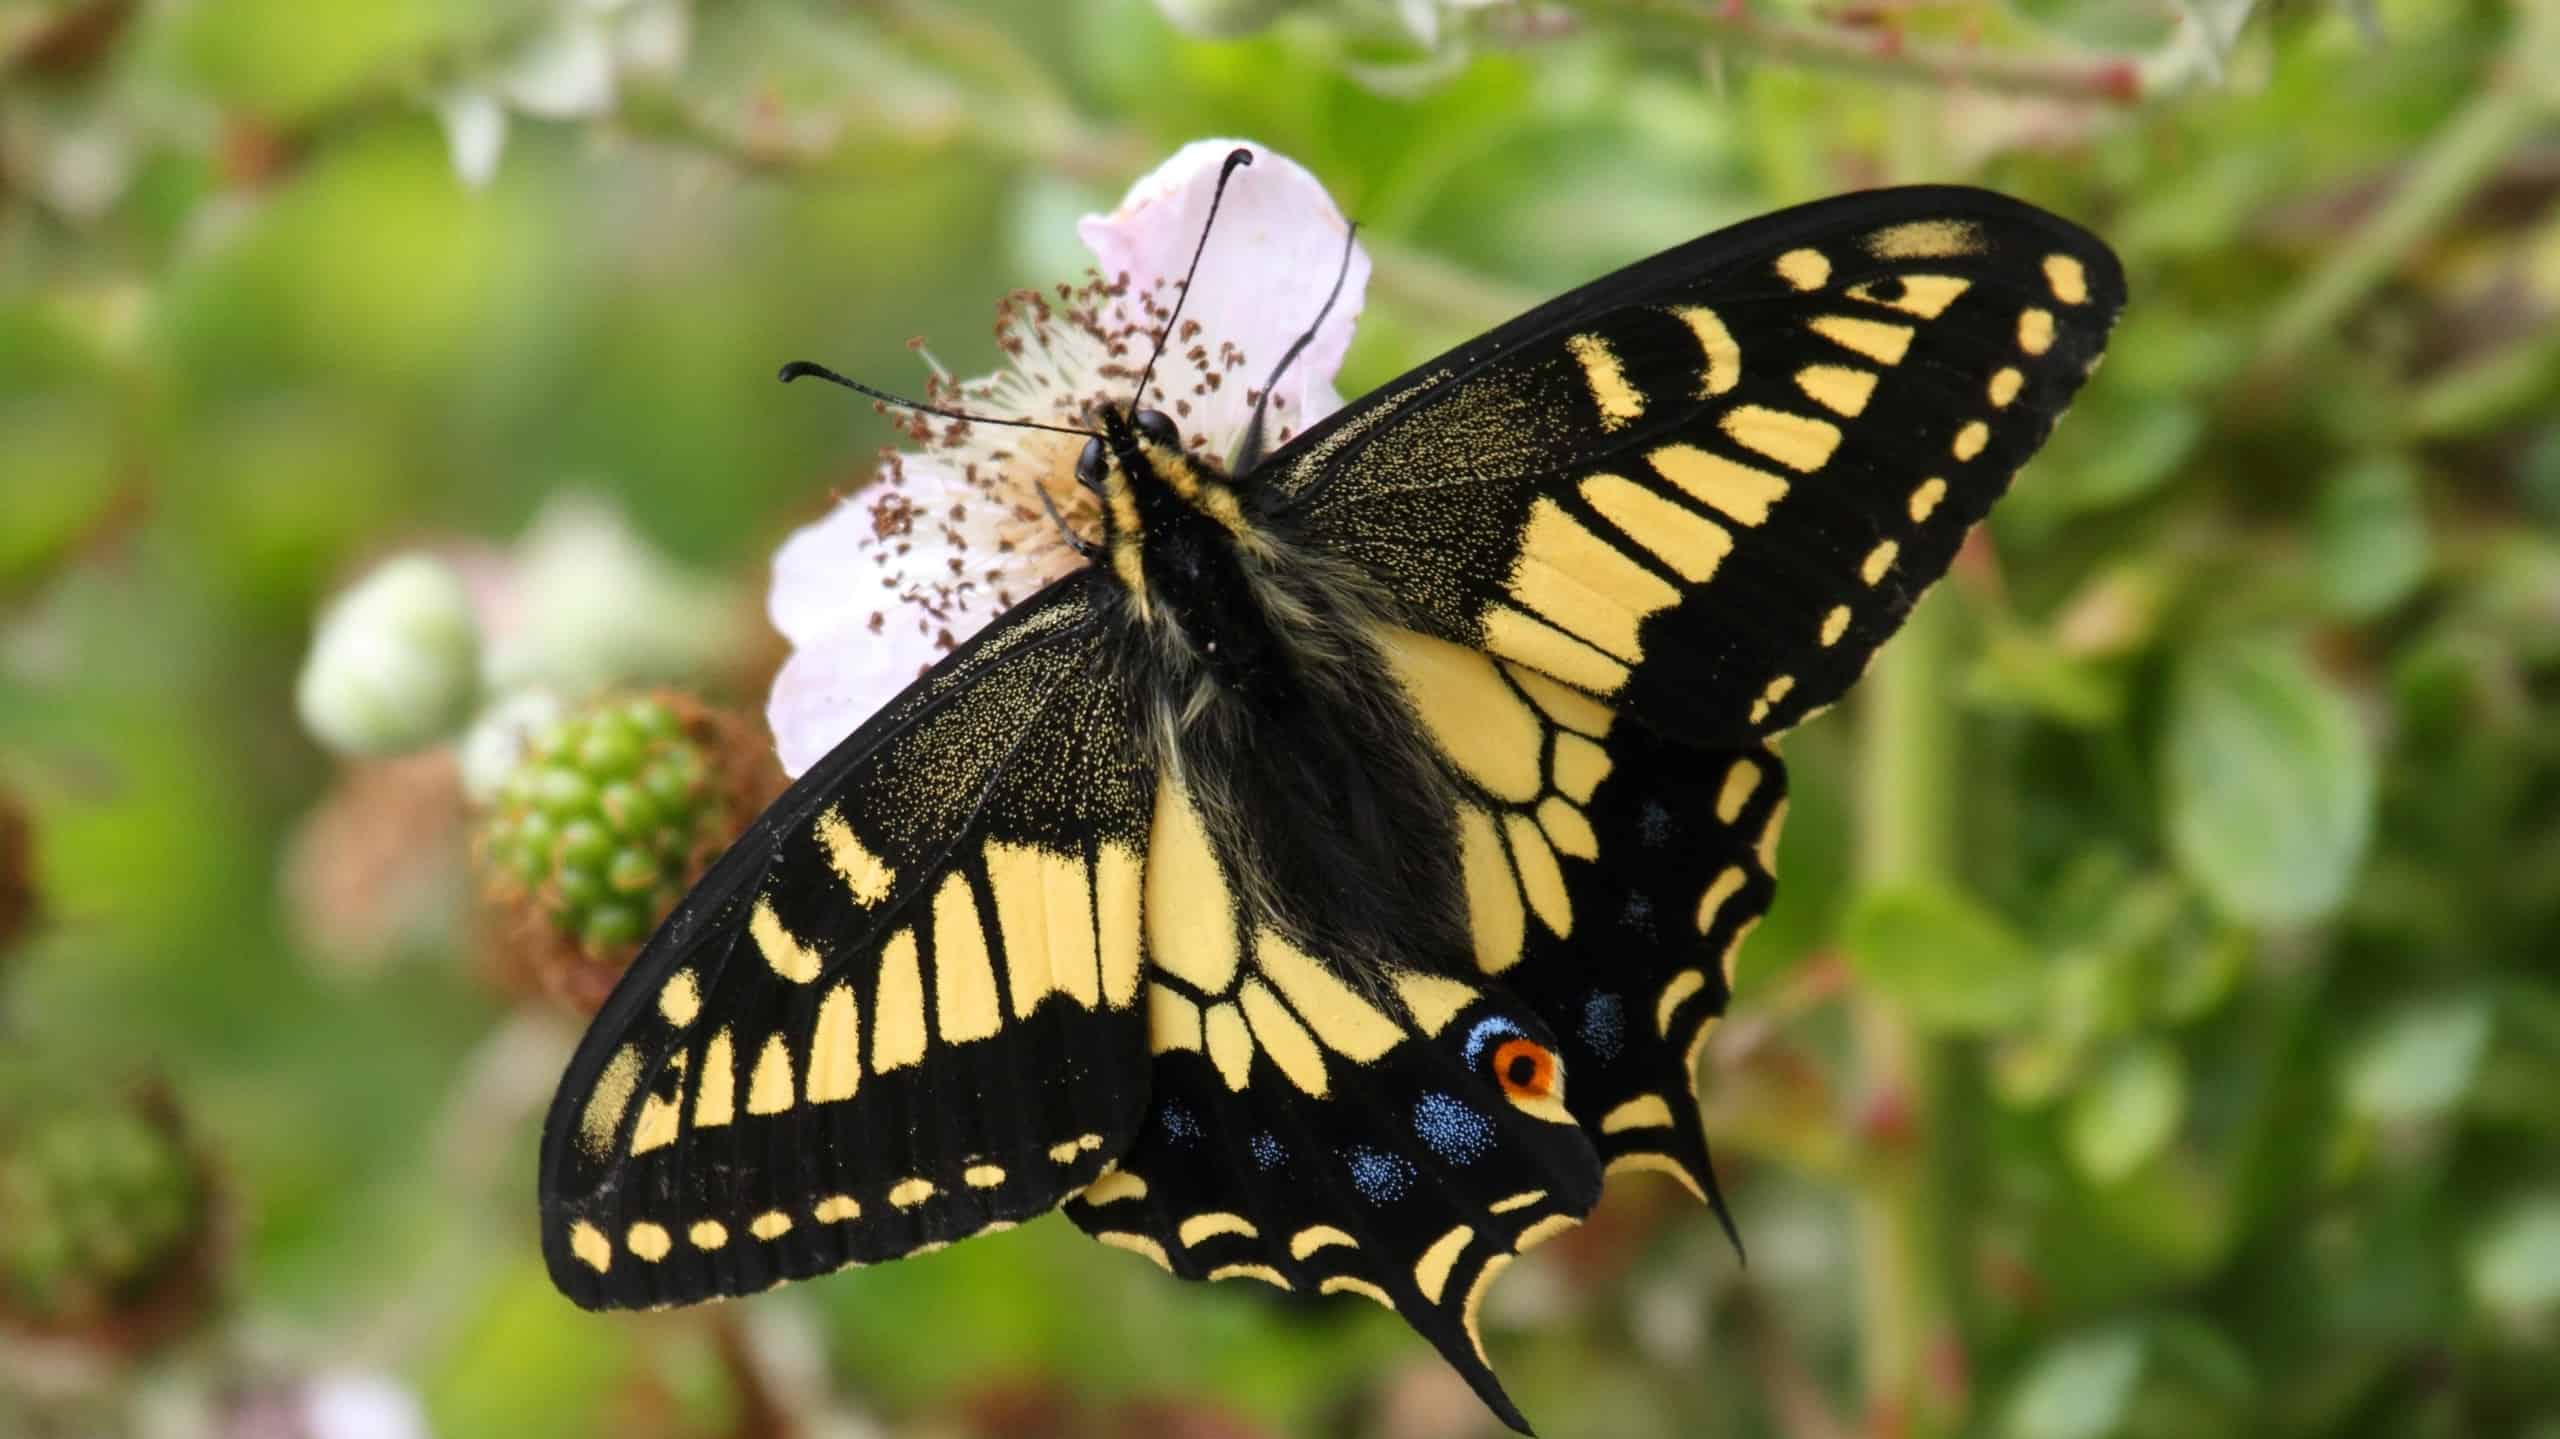 Papilio machaon oregonius or the Oregon swallowtail butterfly eating nectar from a flower.